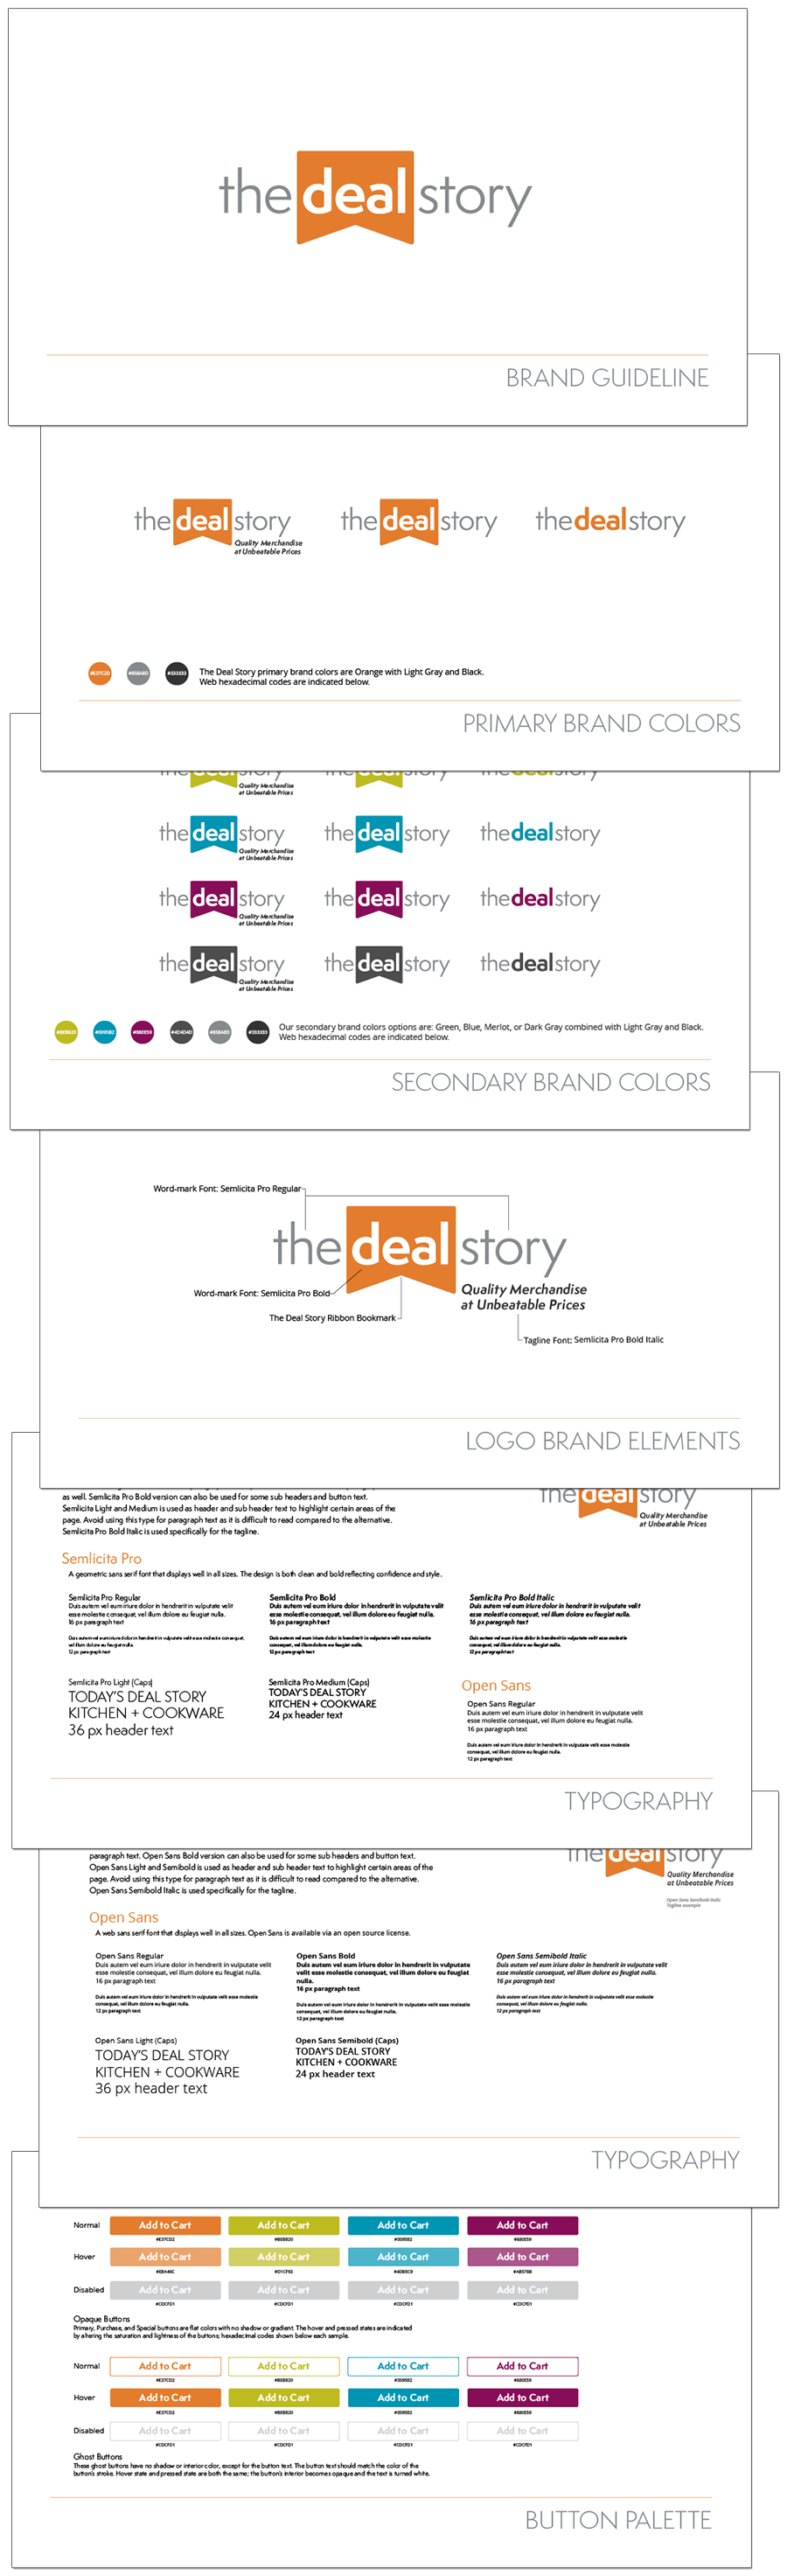 Sample pages from The Deal Story brand Guideline PDF